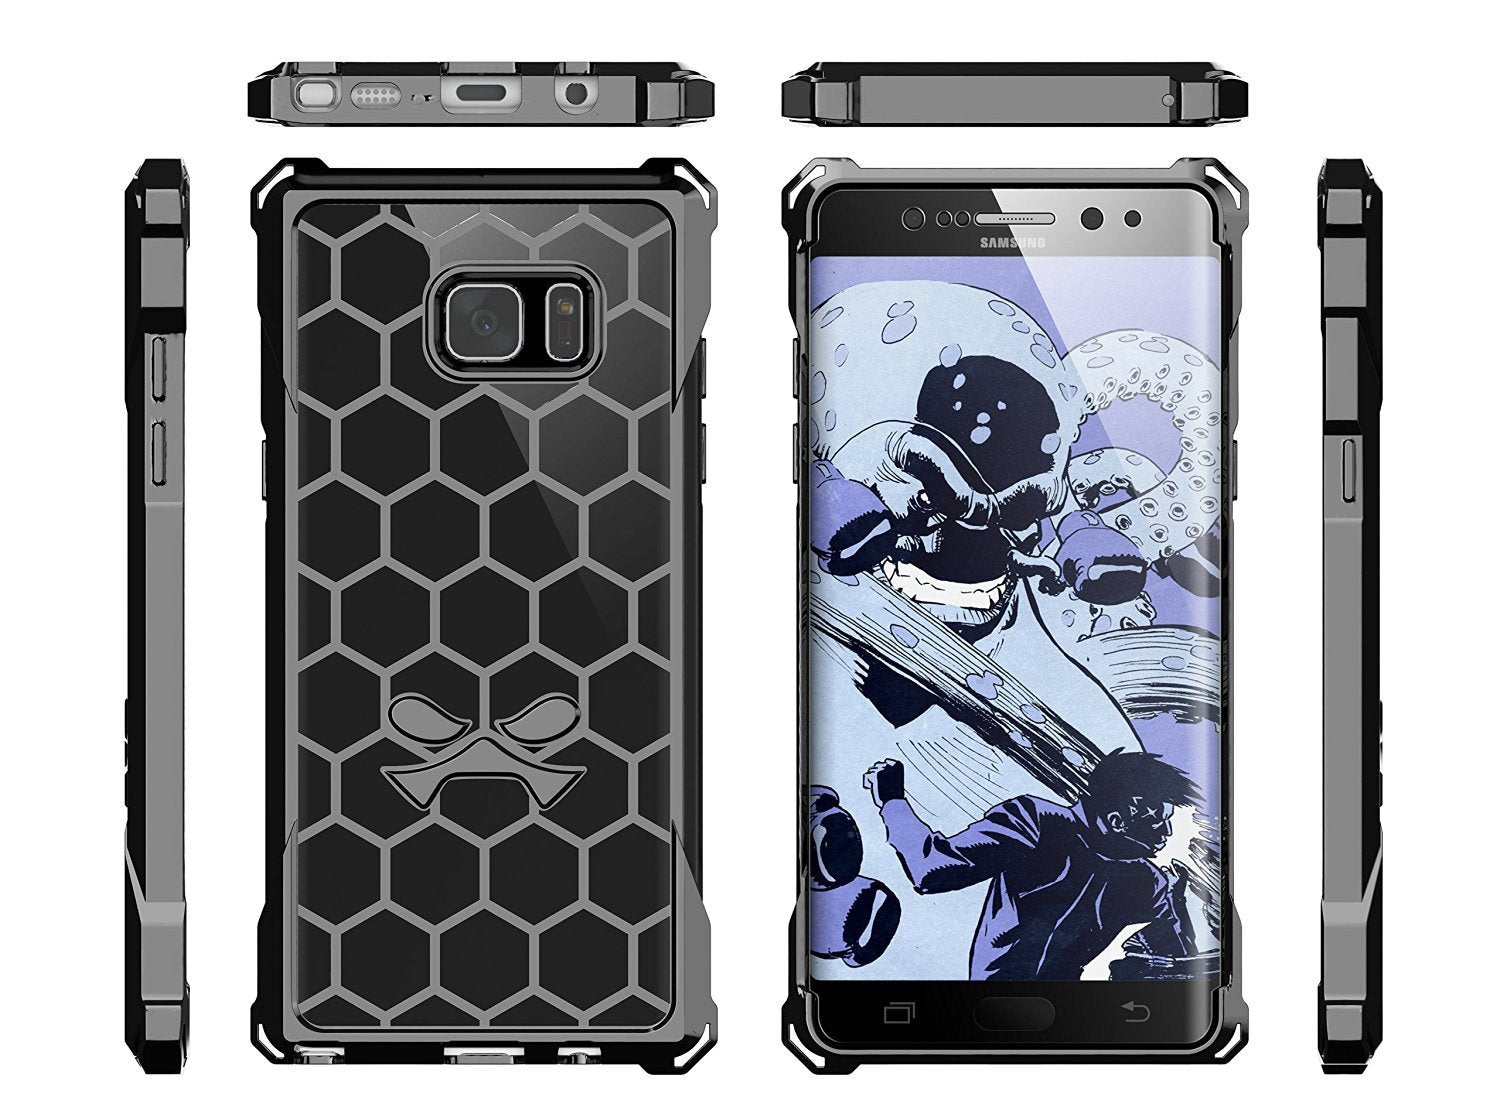 Note 7 Case, Ghostek® Covert Series  w/ Explosion-Proof Screen Protector | Ultra Fit